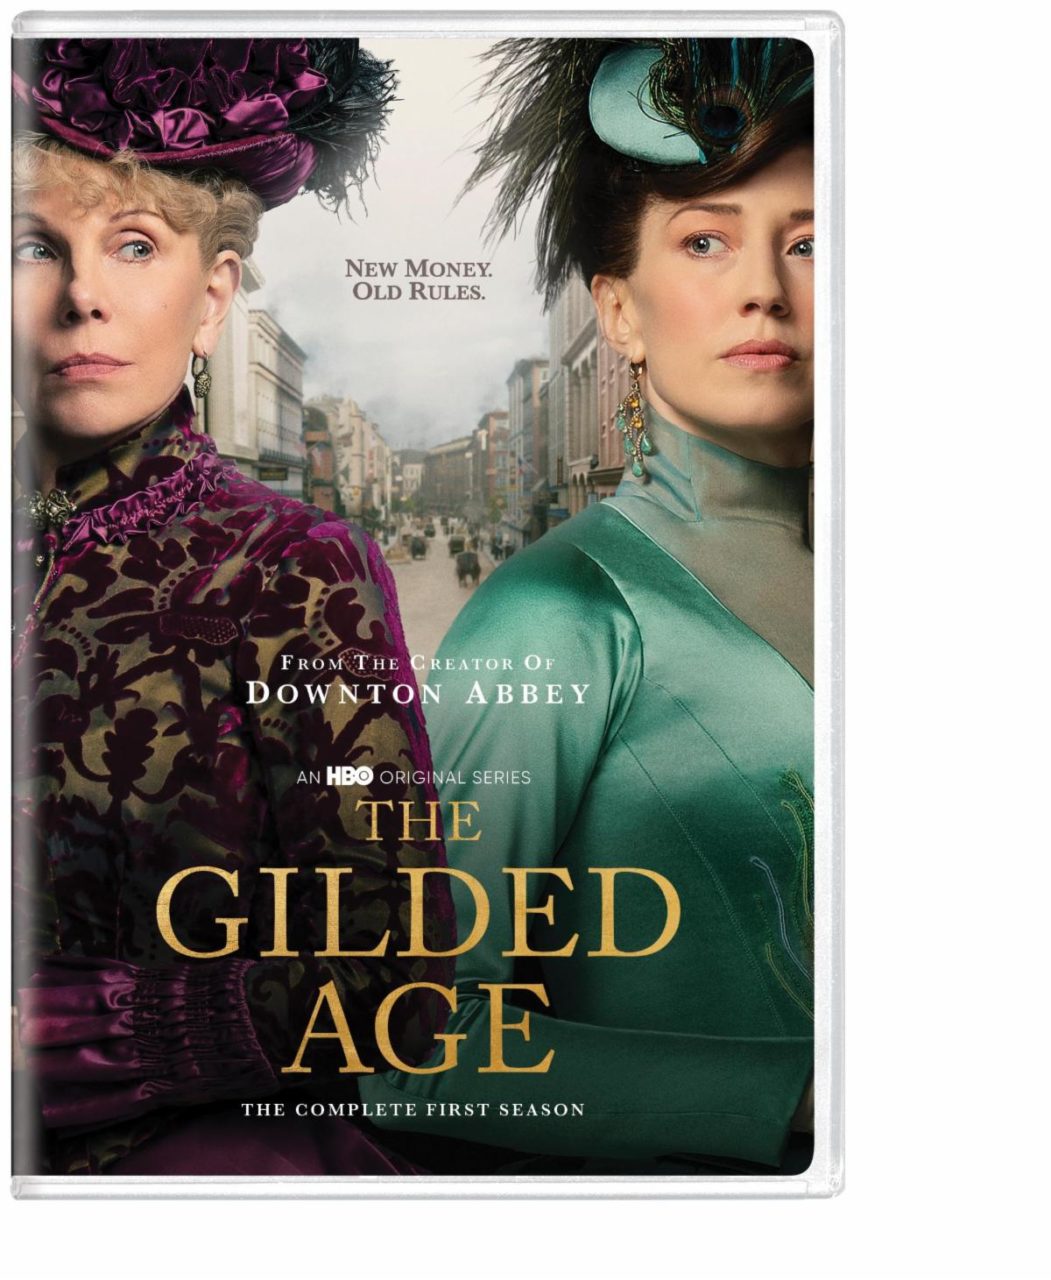 The Gilded Age DVD cover (Warner Bros. Home Entertainment)